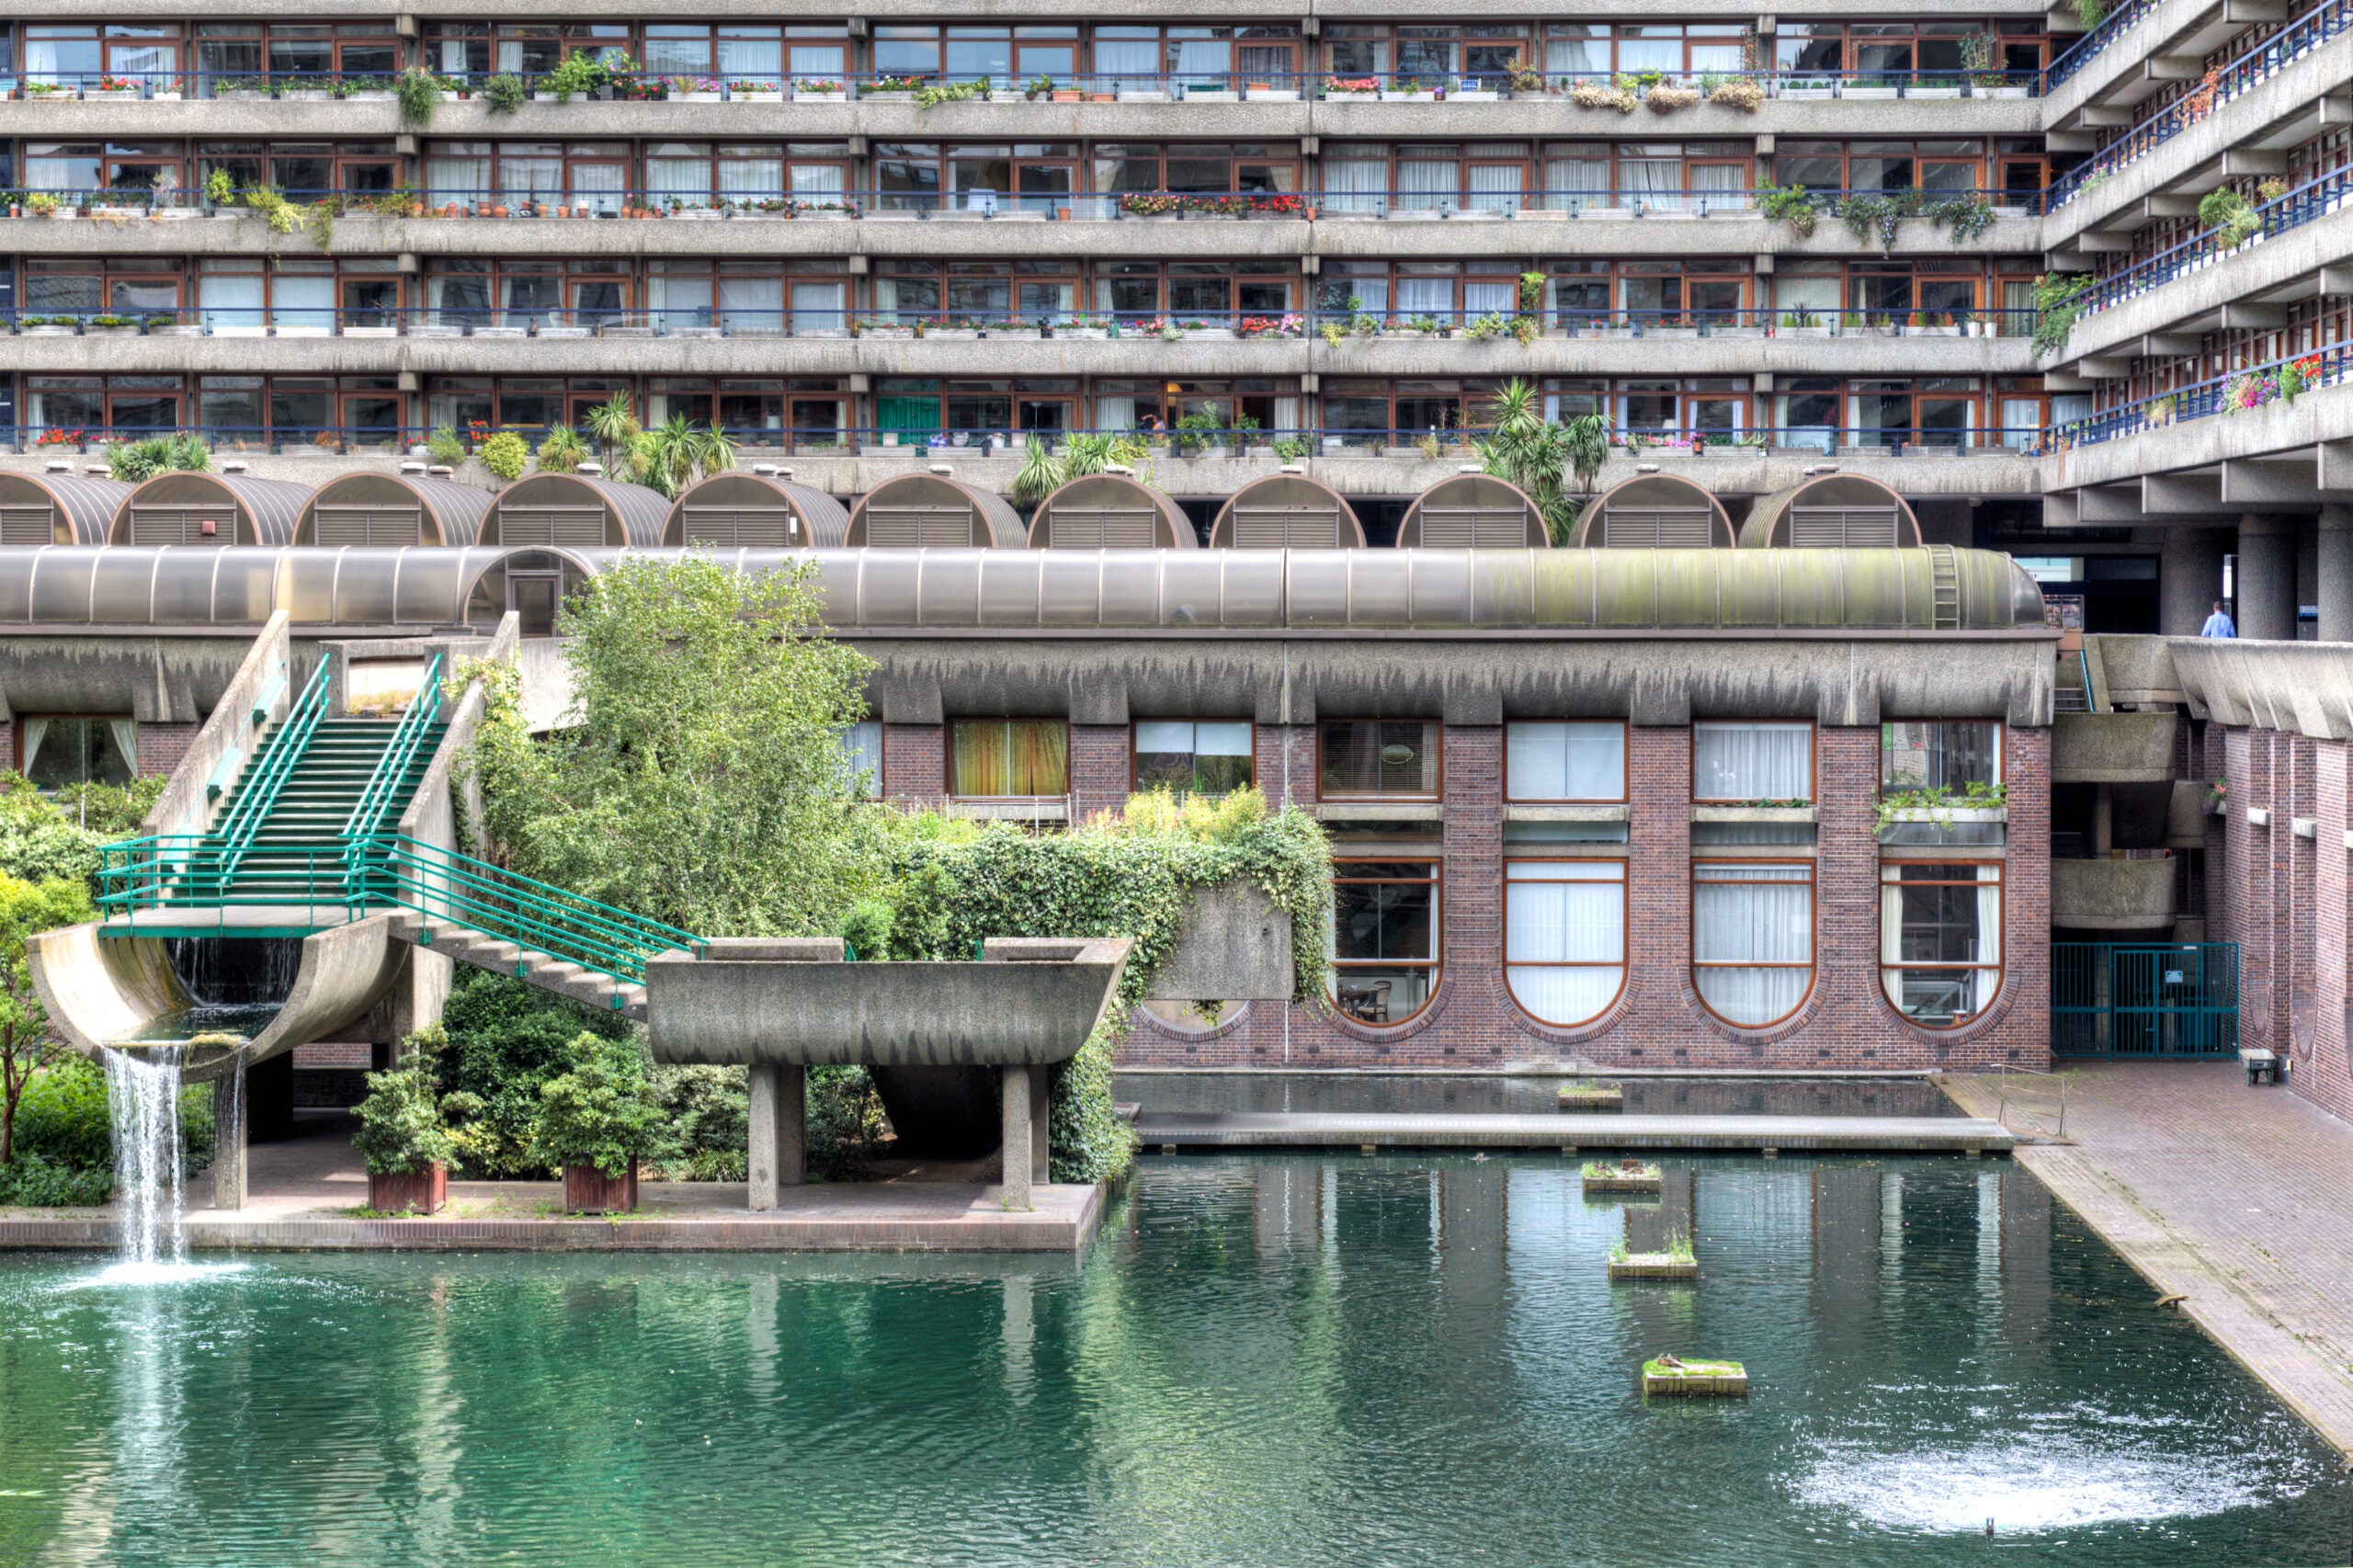 The Barbican Estate is an example of Brutalist architecture. 